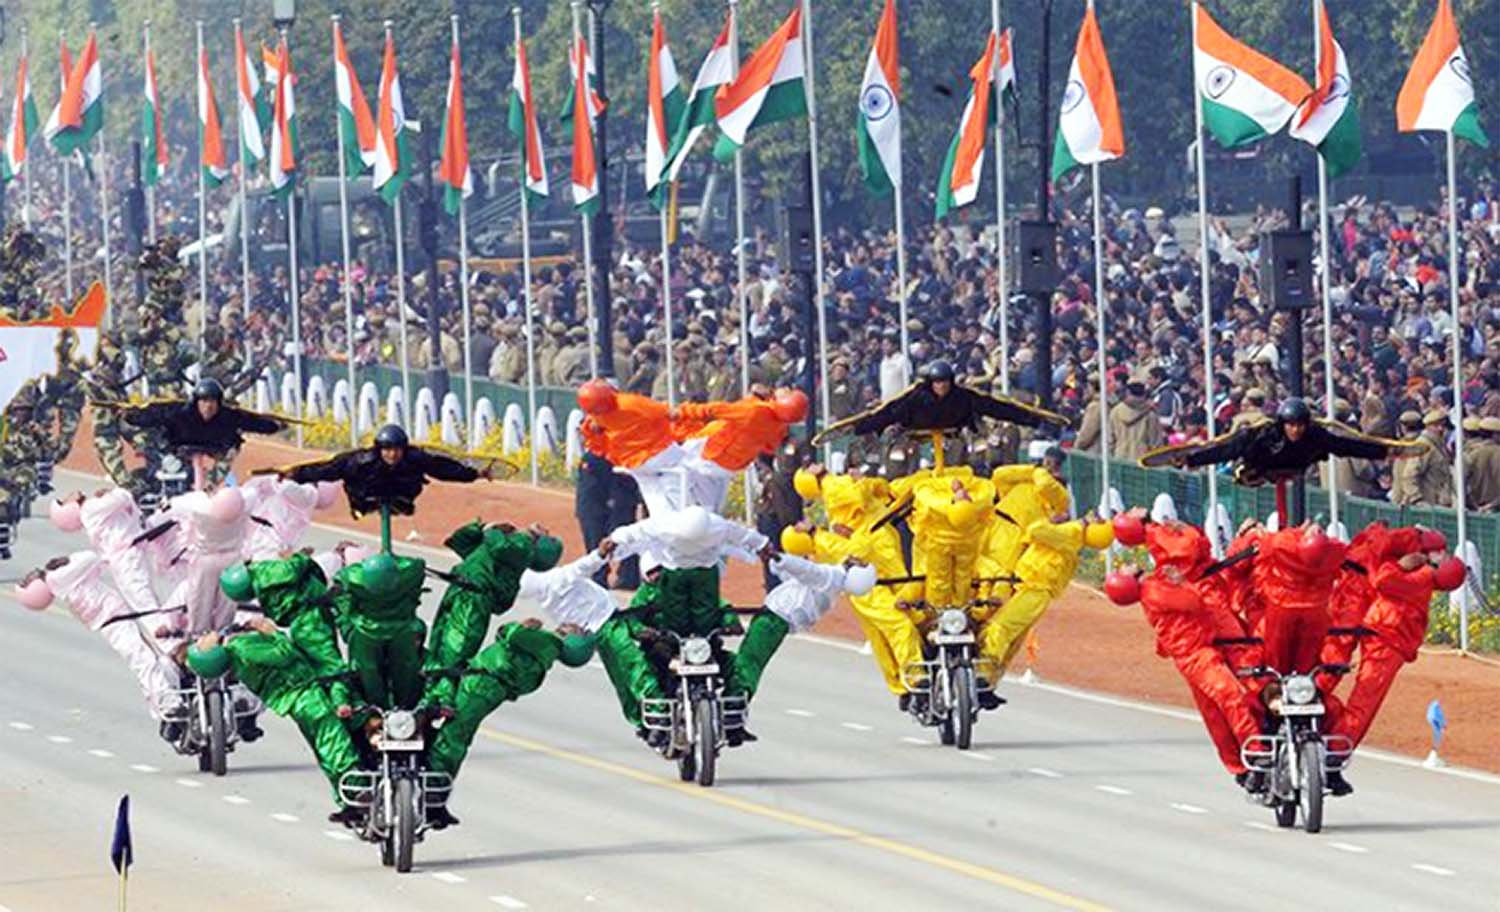 Bike stunts during republic day celebration by Indian Army